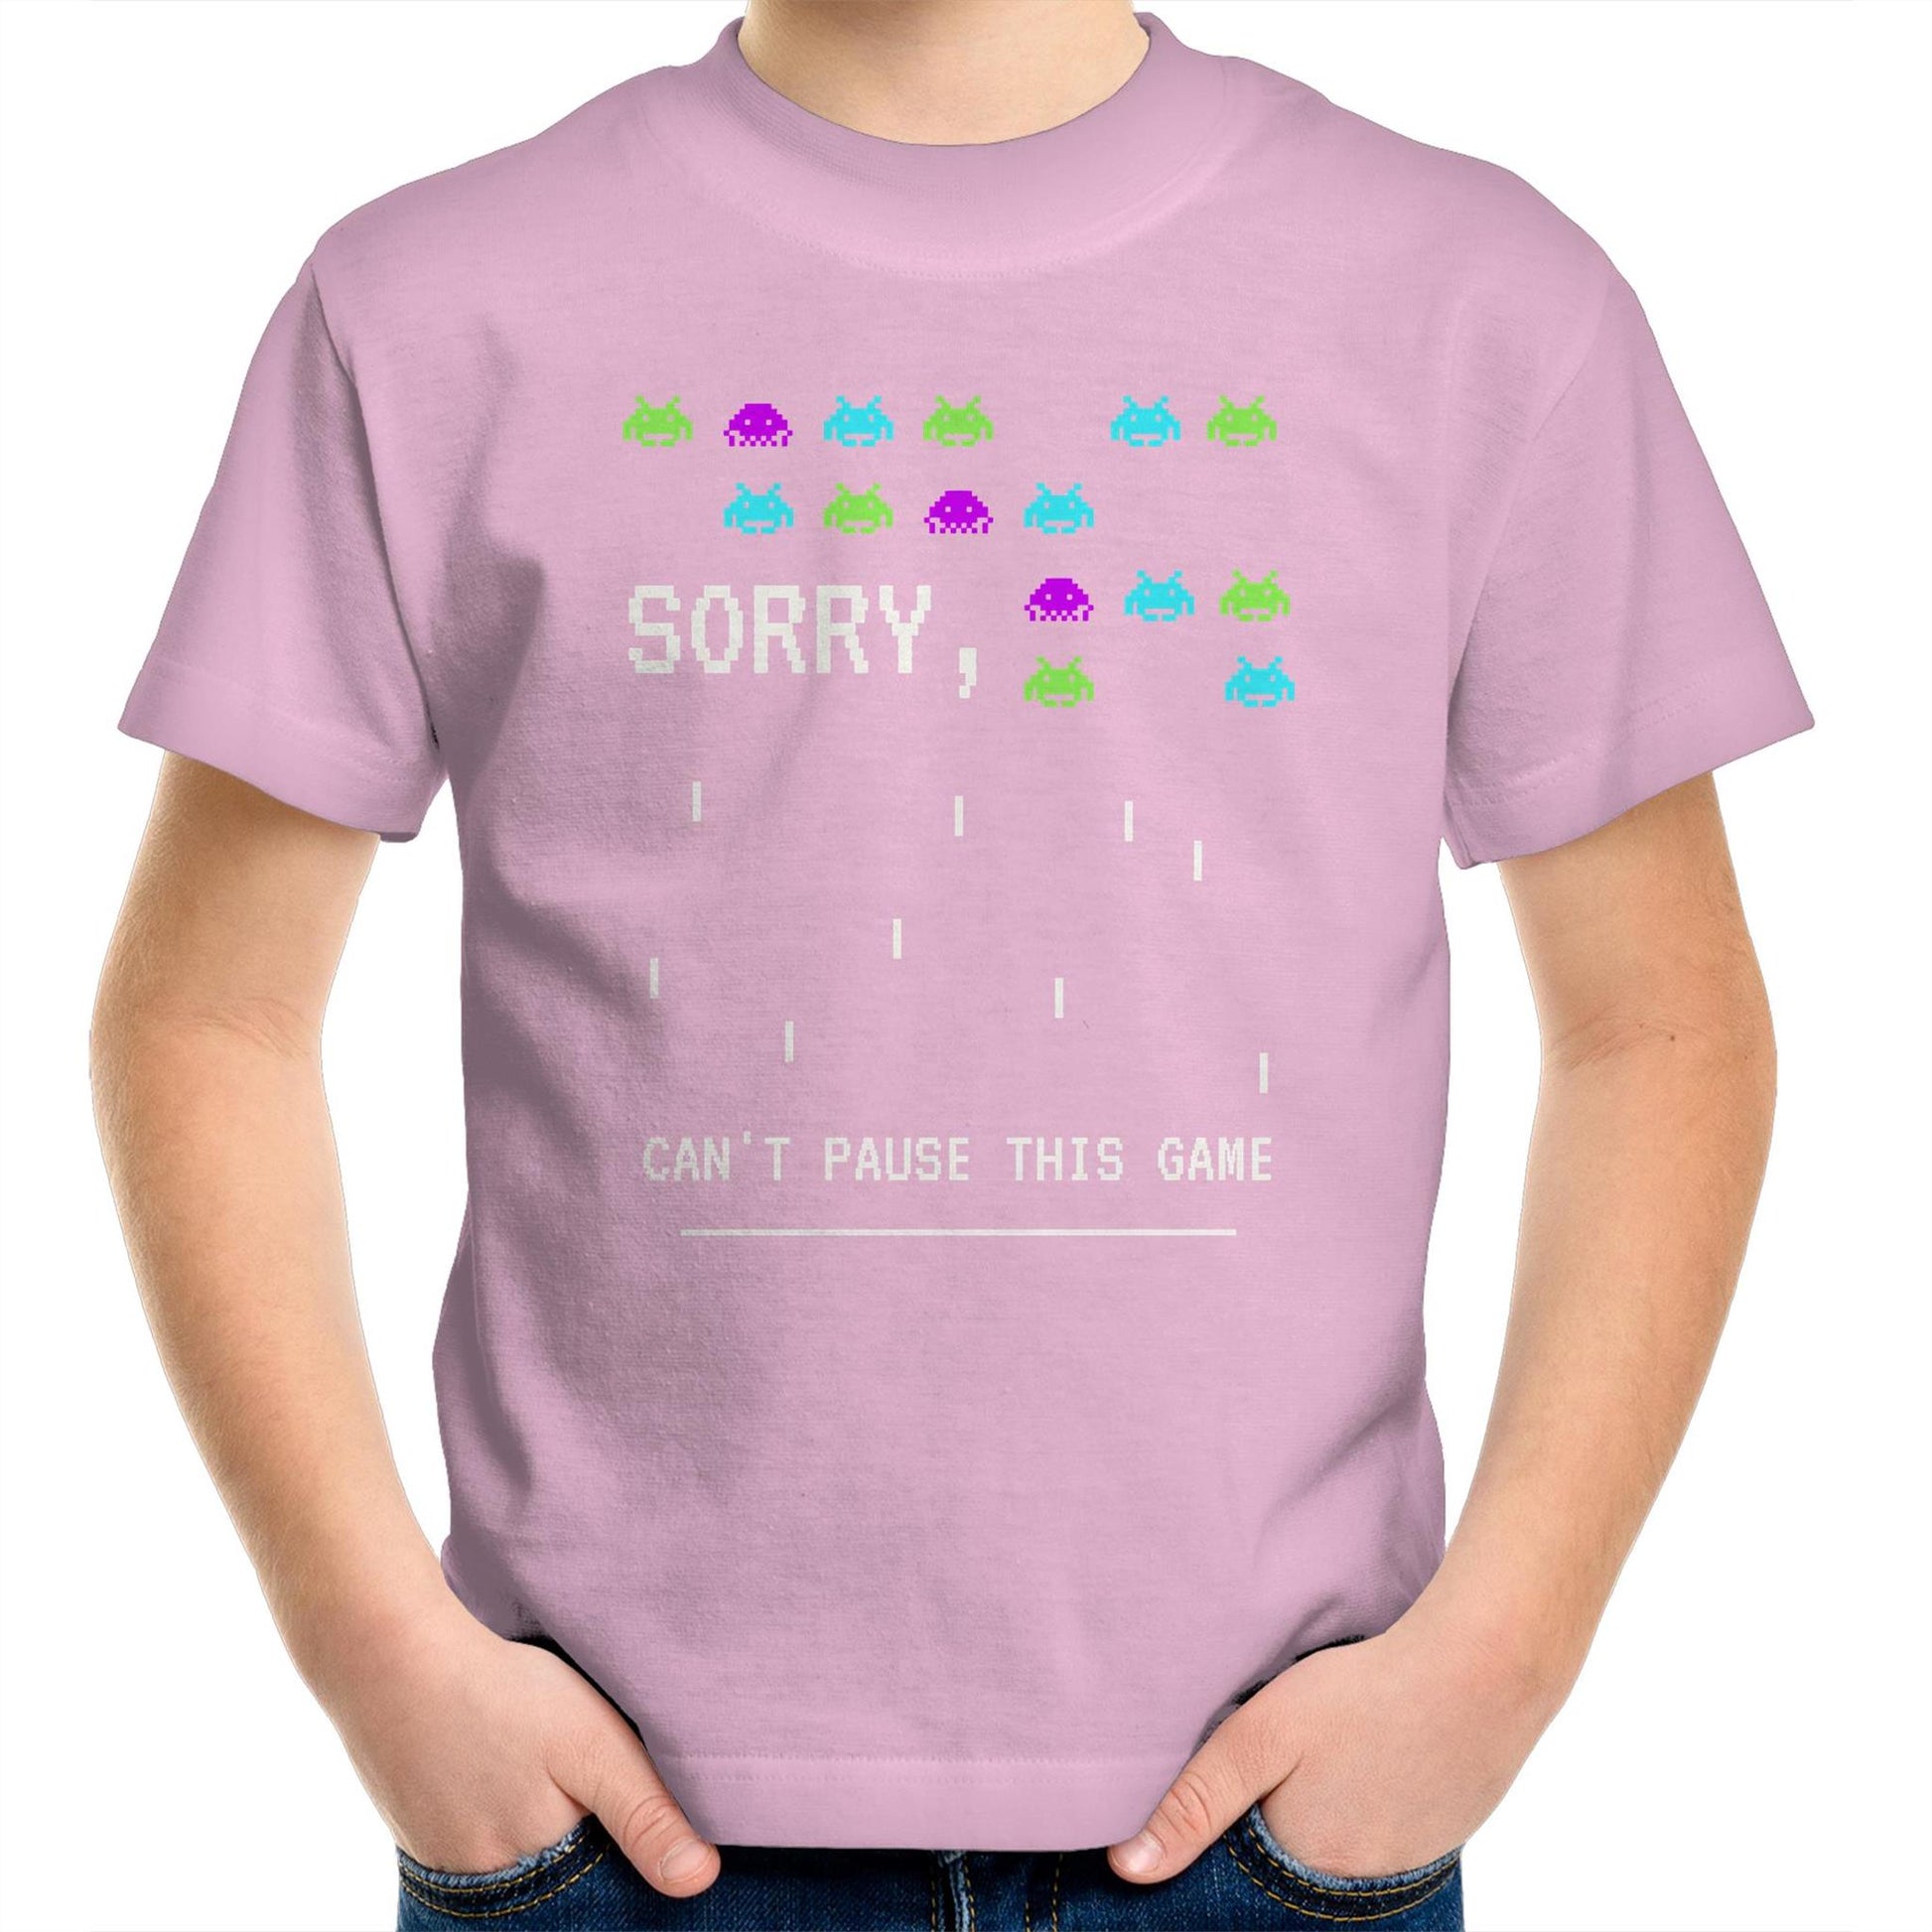 Sorry, Can't Pause This Game - Kids Youth Crew T-Shirt Pink Kids Youth T-shirt Games